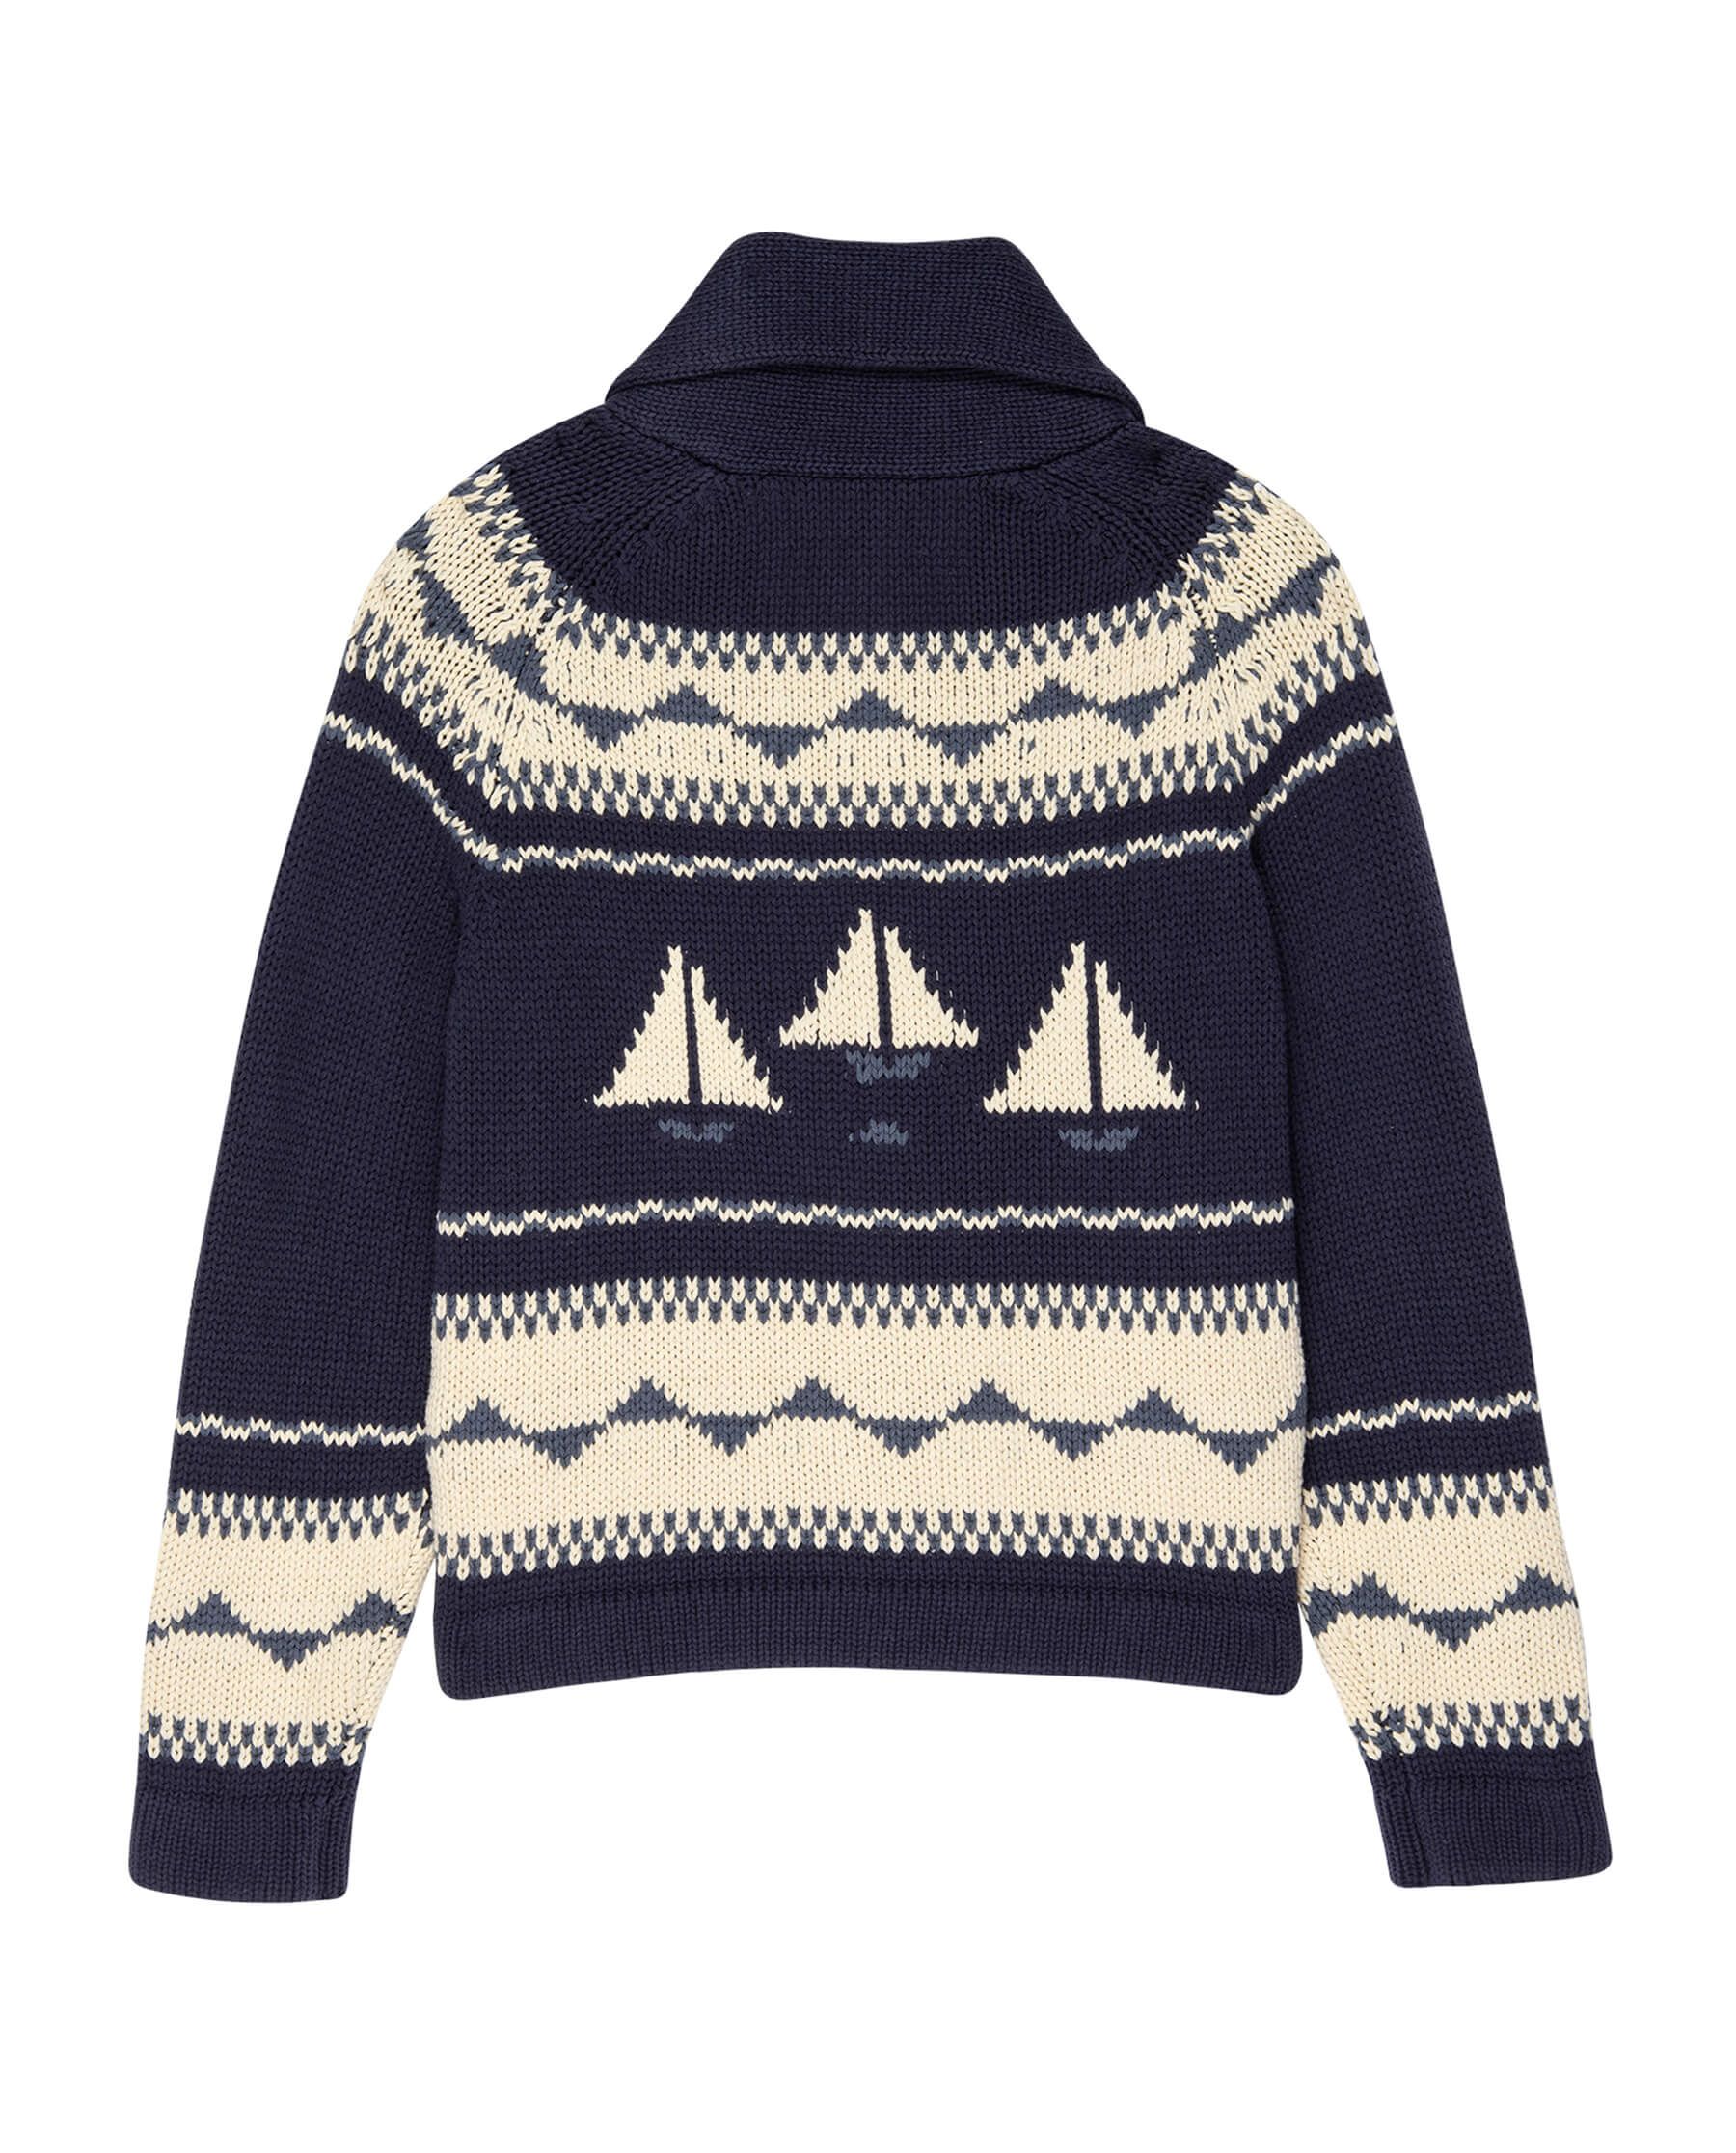 The Sailboat Lodge Cardigan. | THE GREAT.